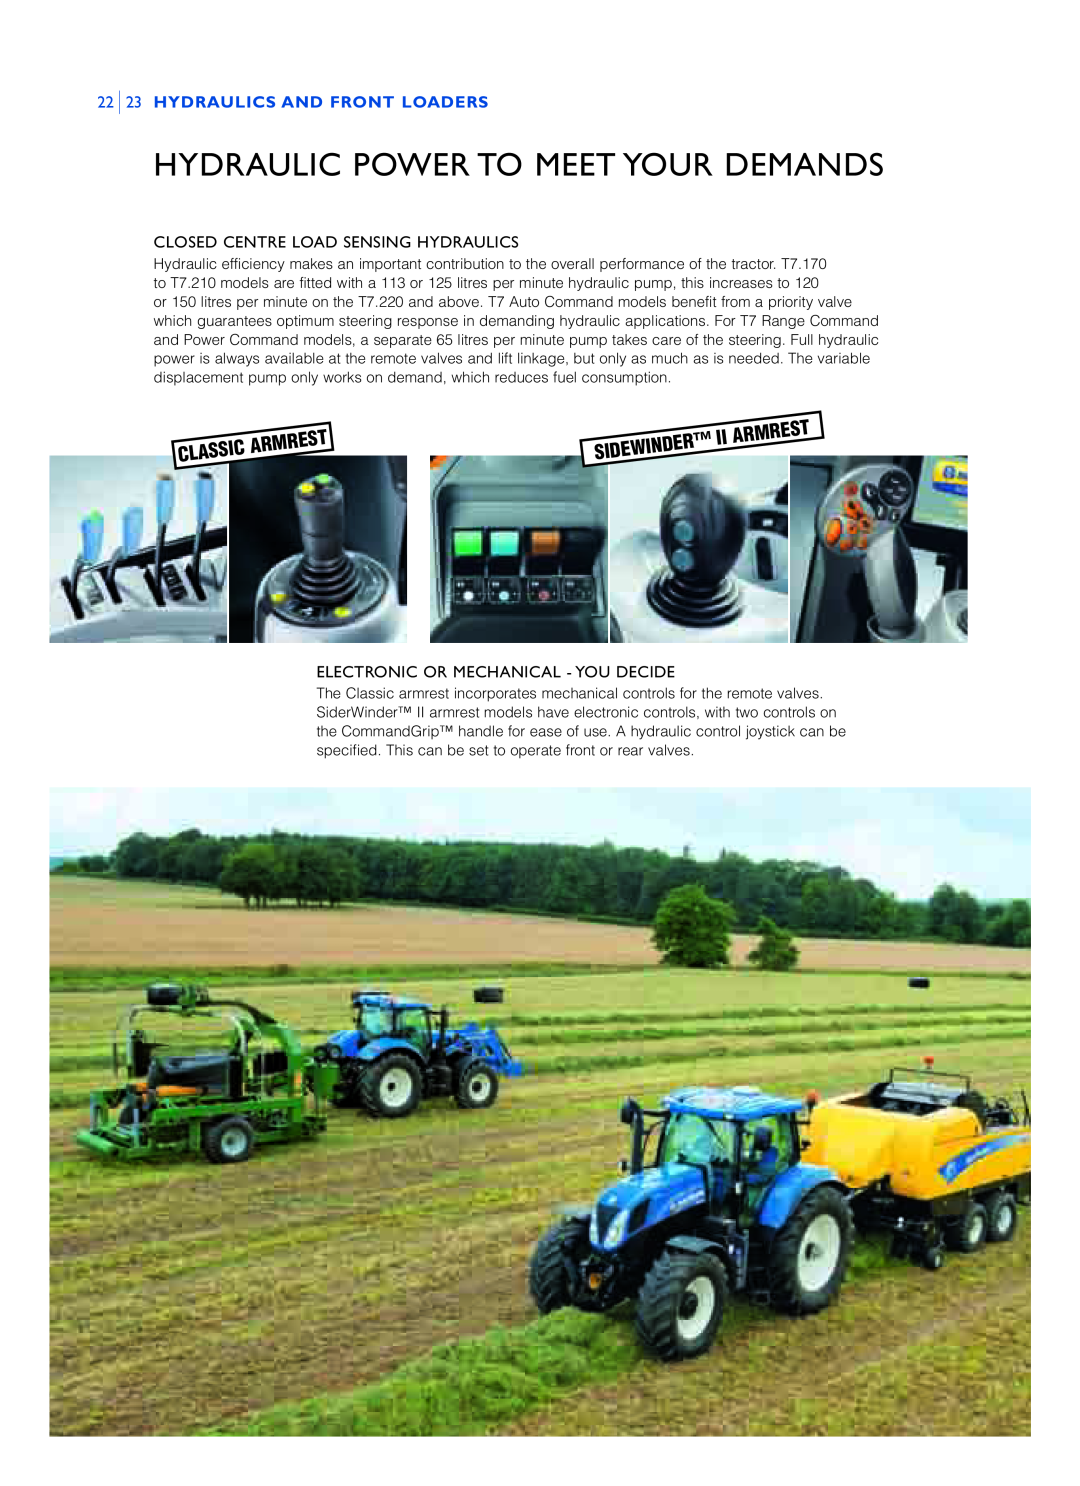 New Holland T7.235 Hydraulic Power To Meet Your Demands, Classic, 22 23 HYDRAULICS AND FRONT LOADERS, Armrest, Sidewinder 